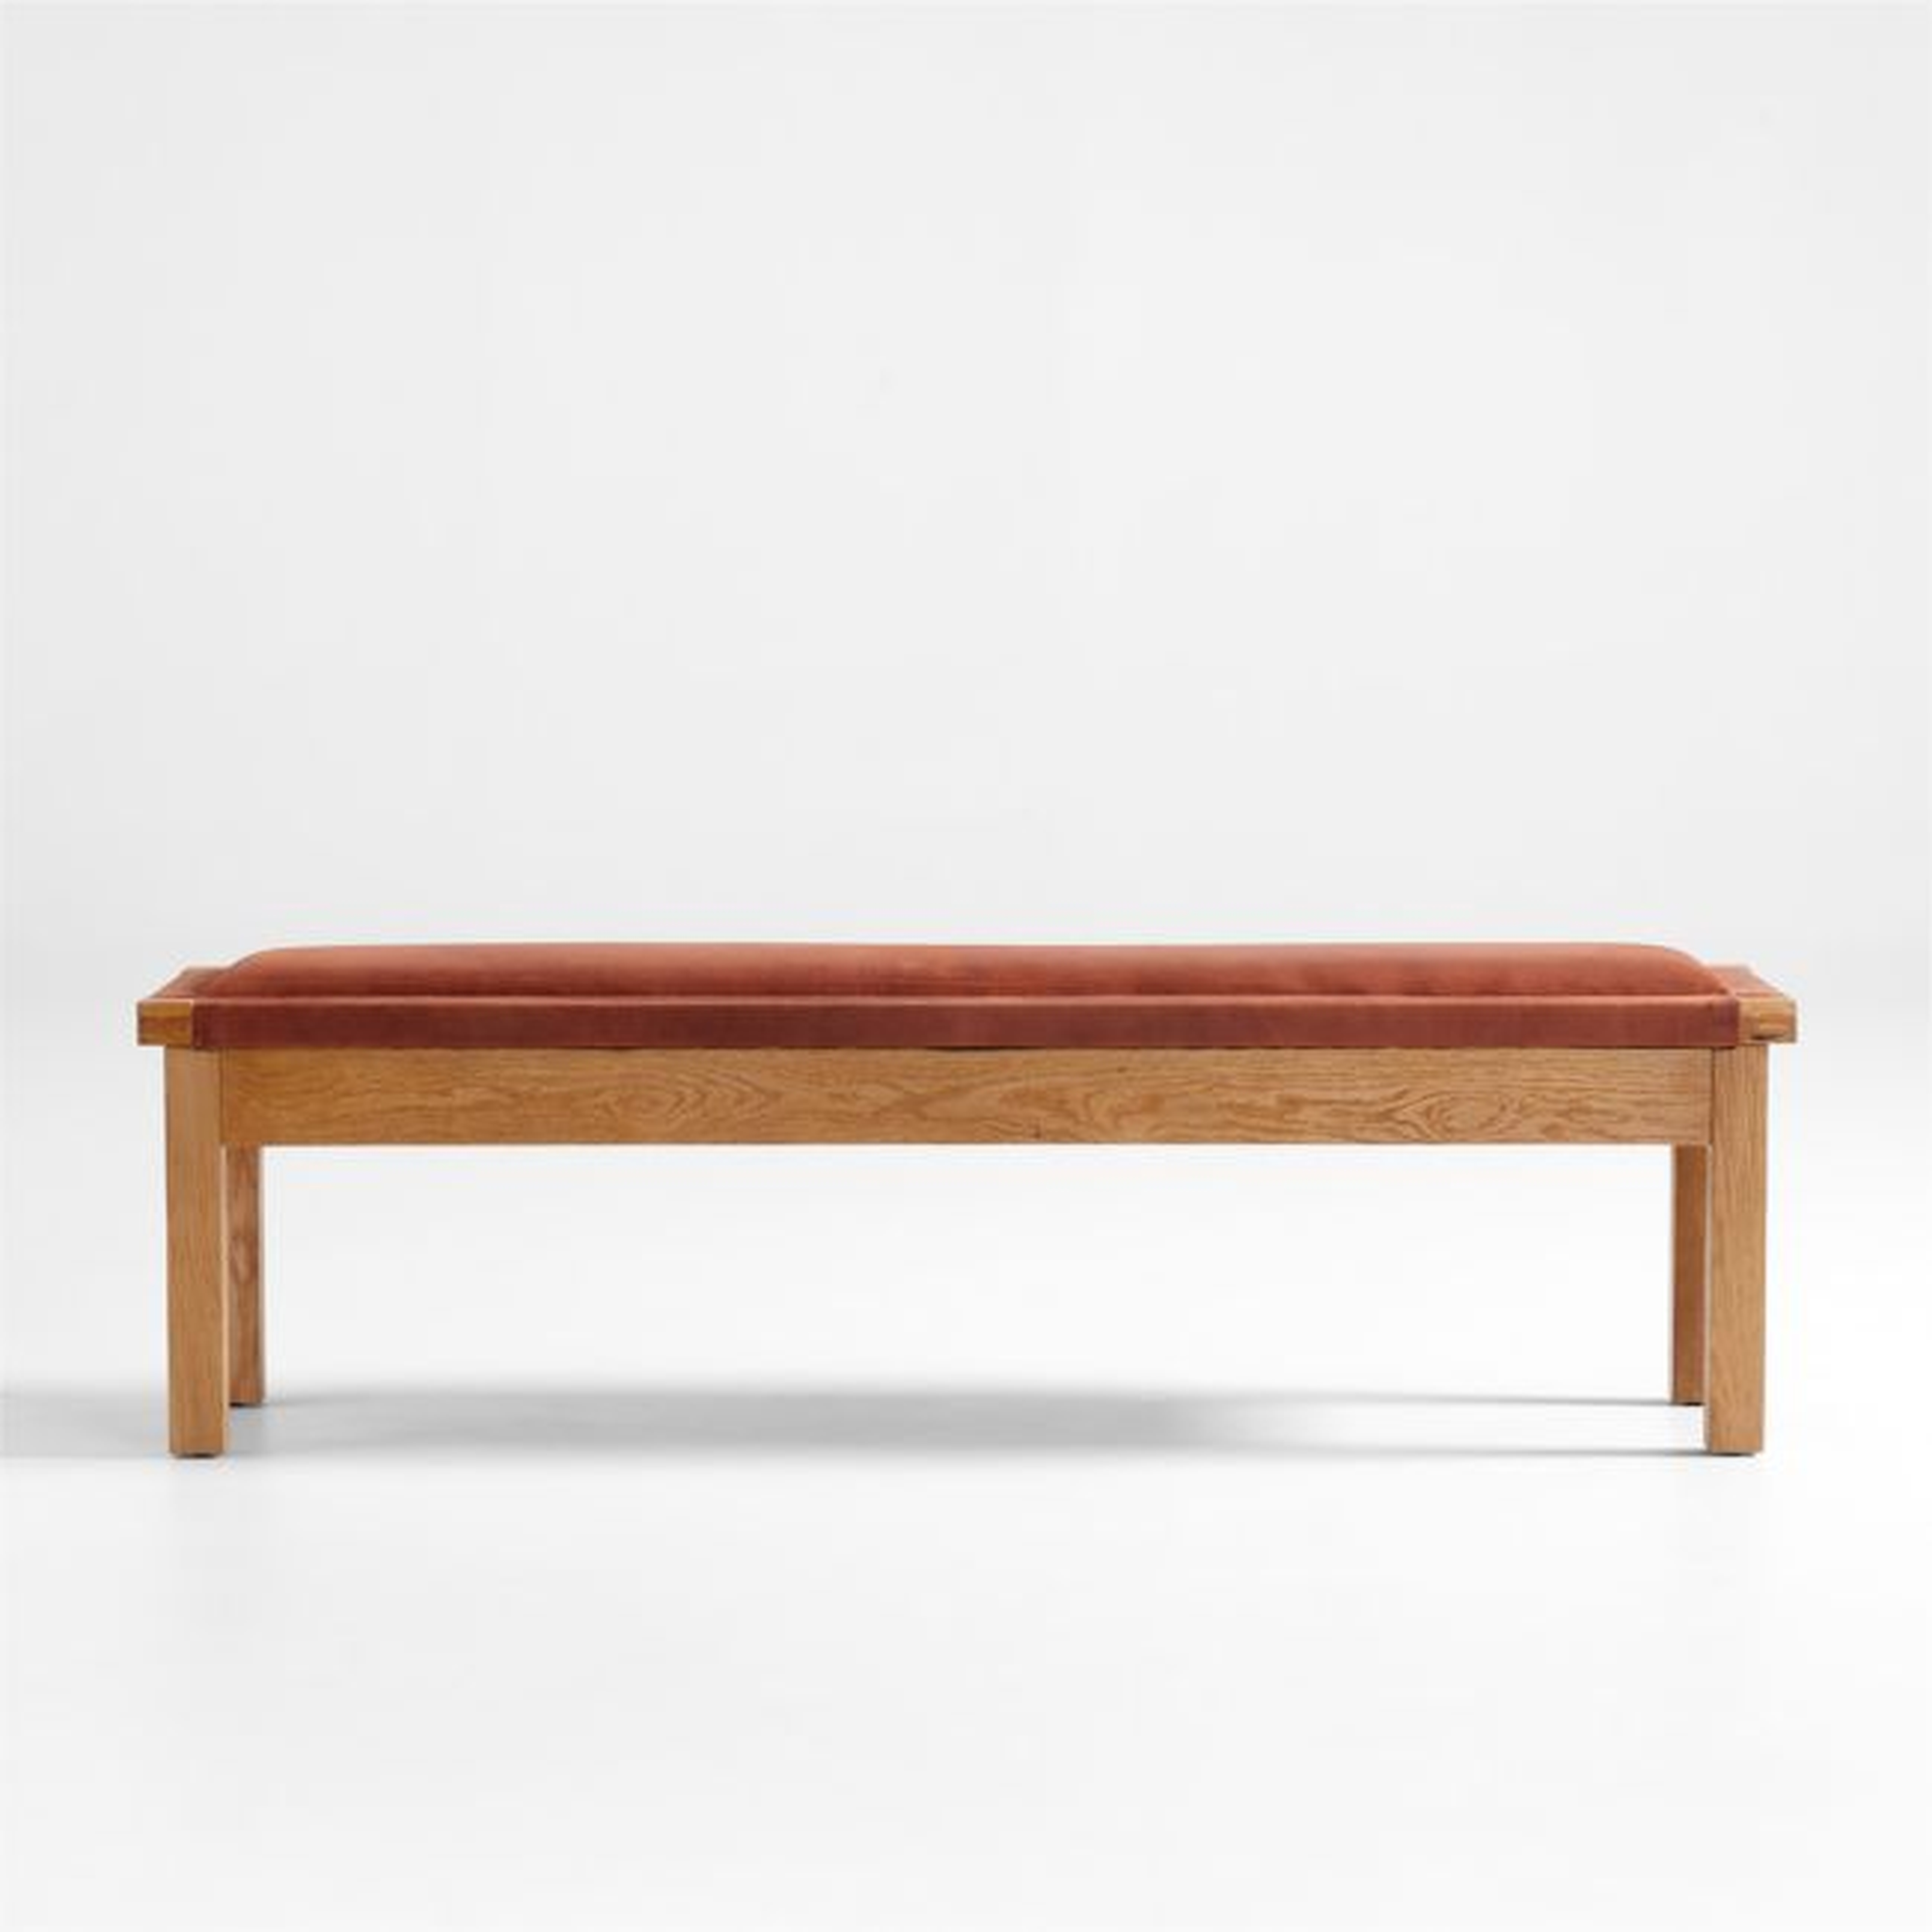 Shinola Hotel Wood and Leather Bench - Crate and Barrel